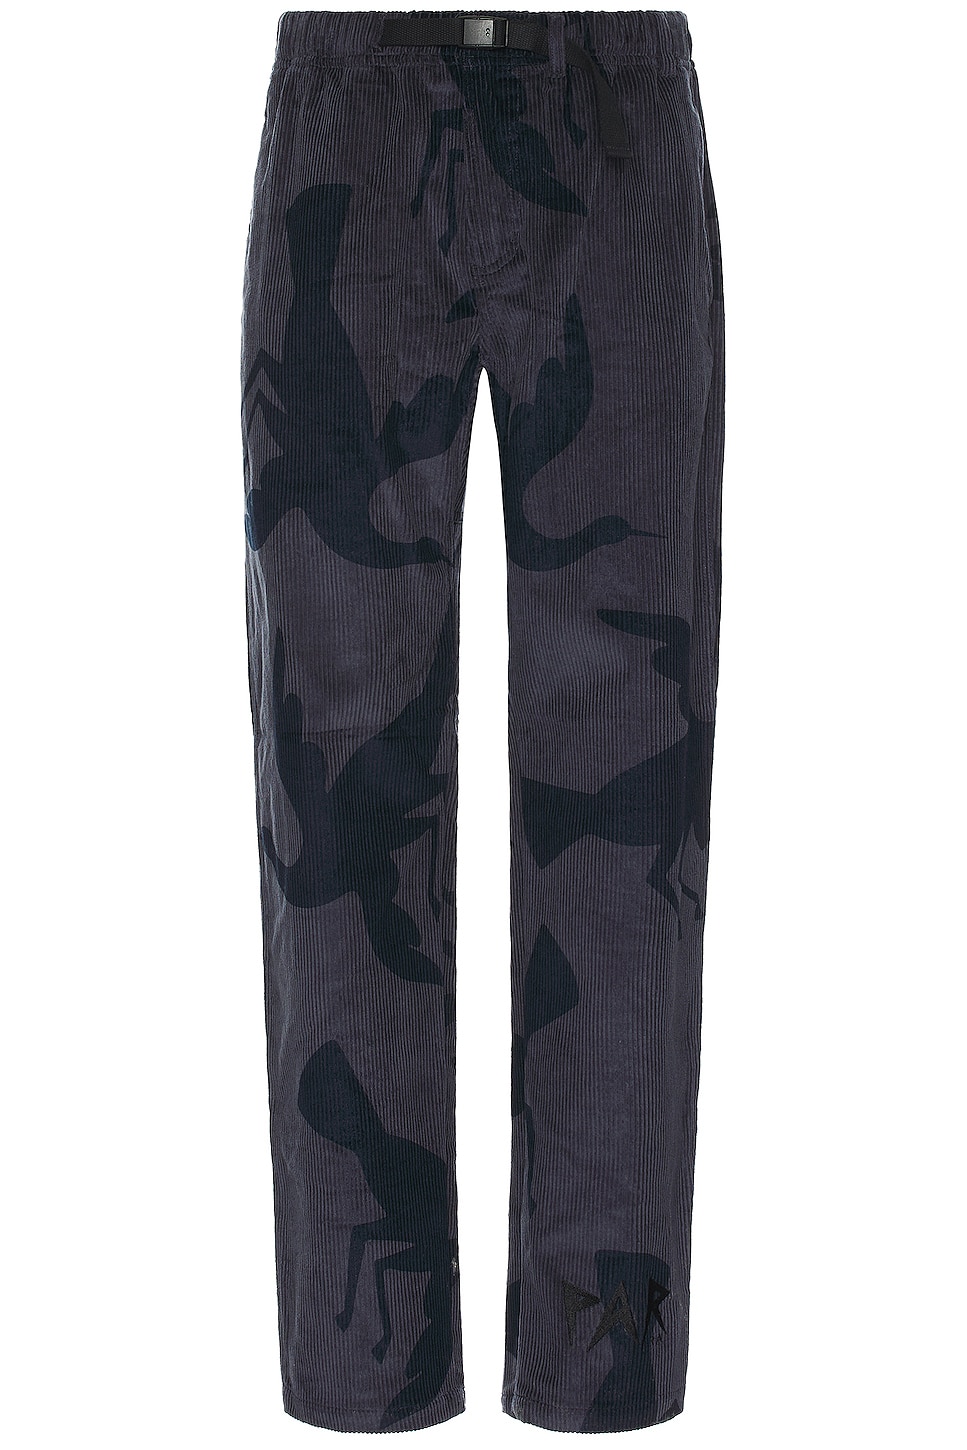 Image 1 of By Parra Clipped Wings Corduroy Pants in Greyish Blue